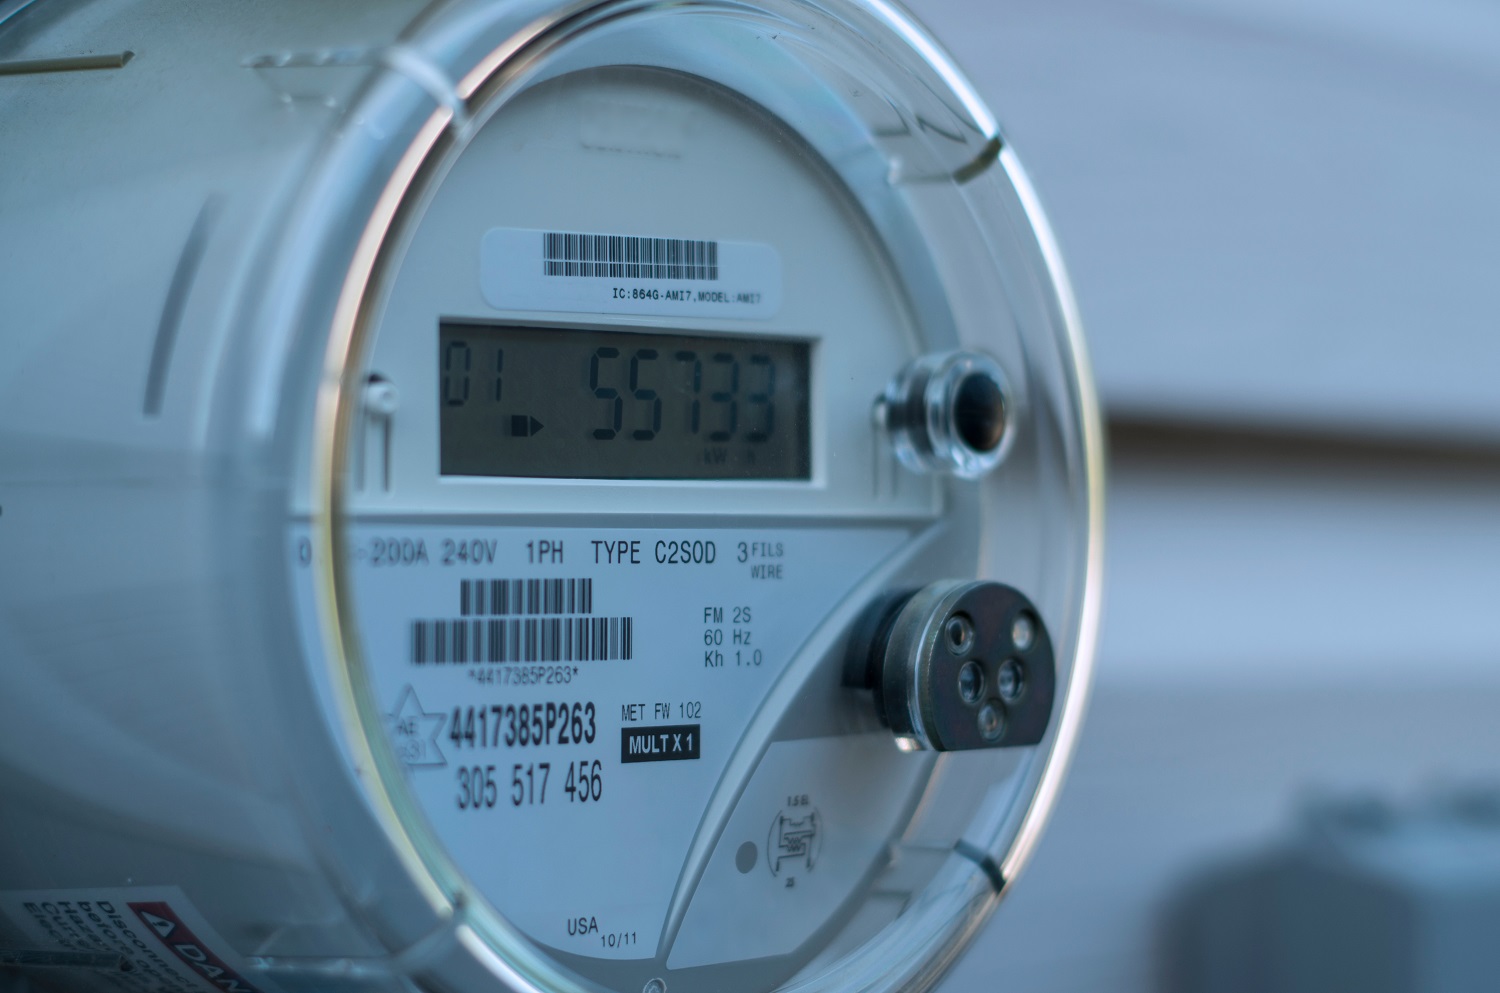 A smart electricity meter measuring a home’s energy consumption